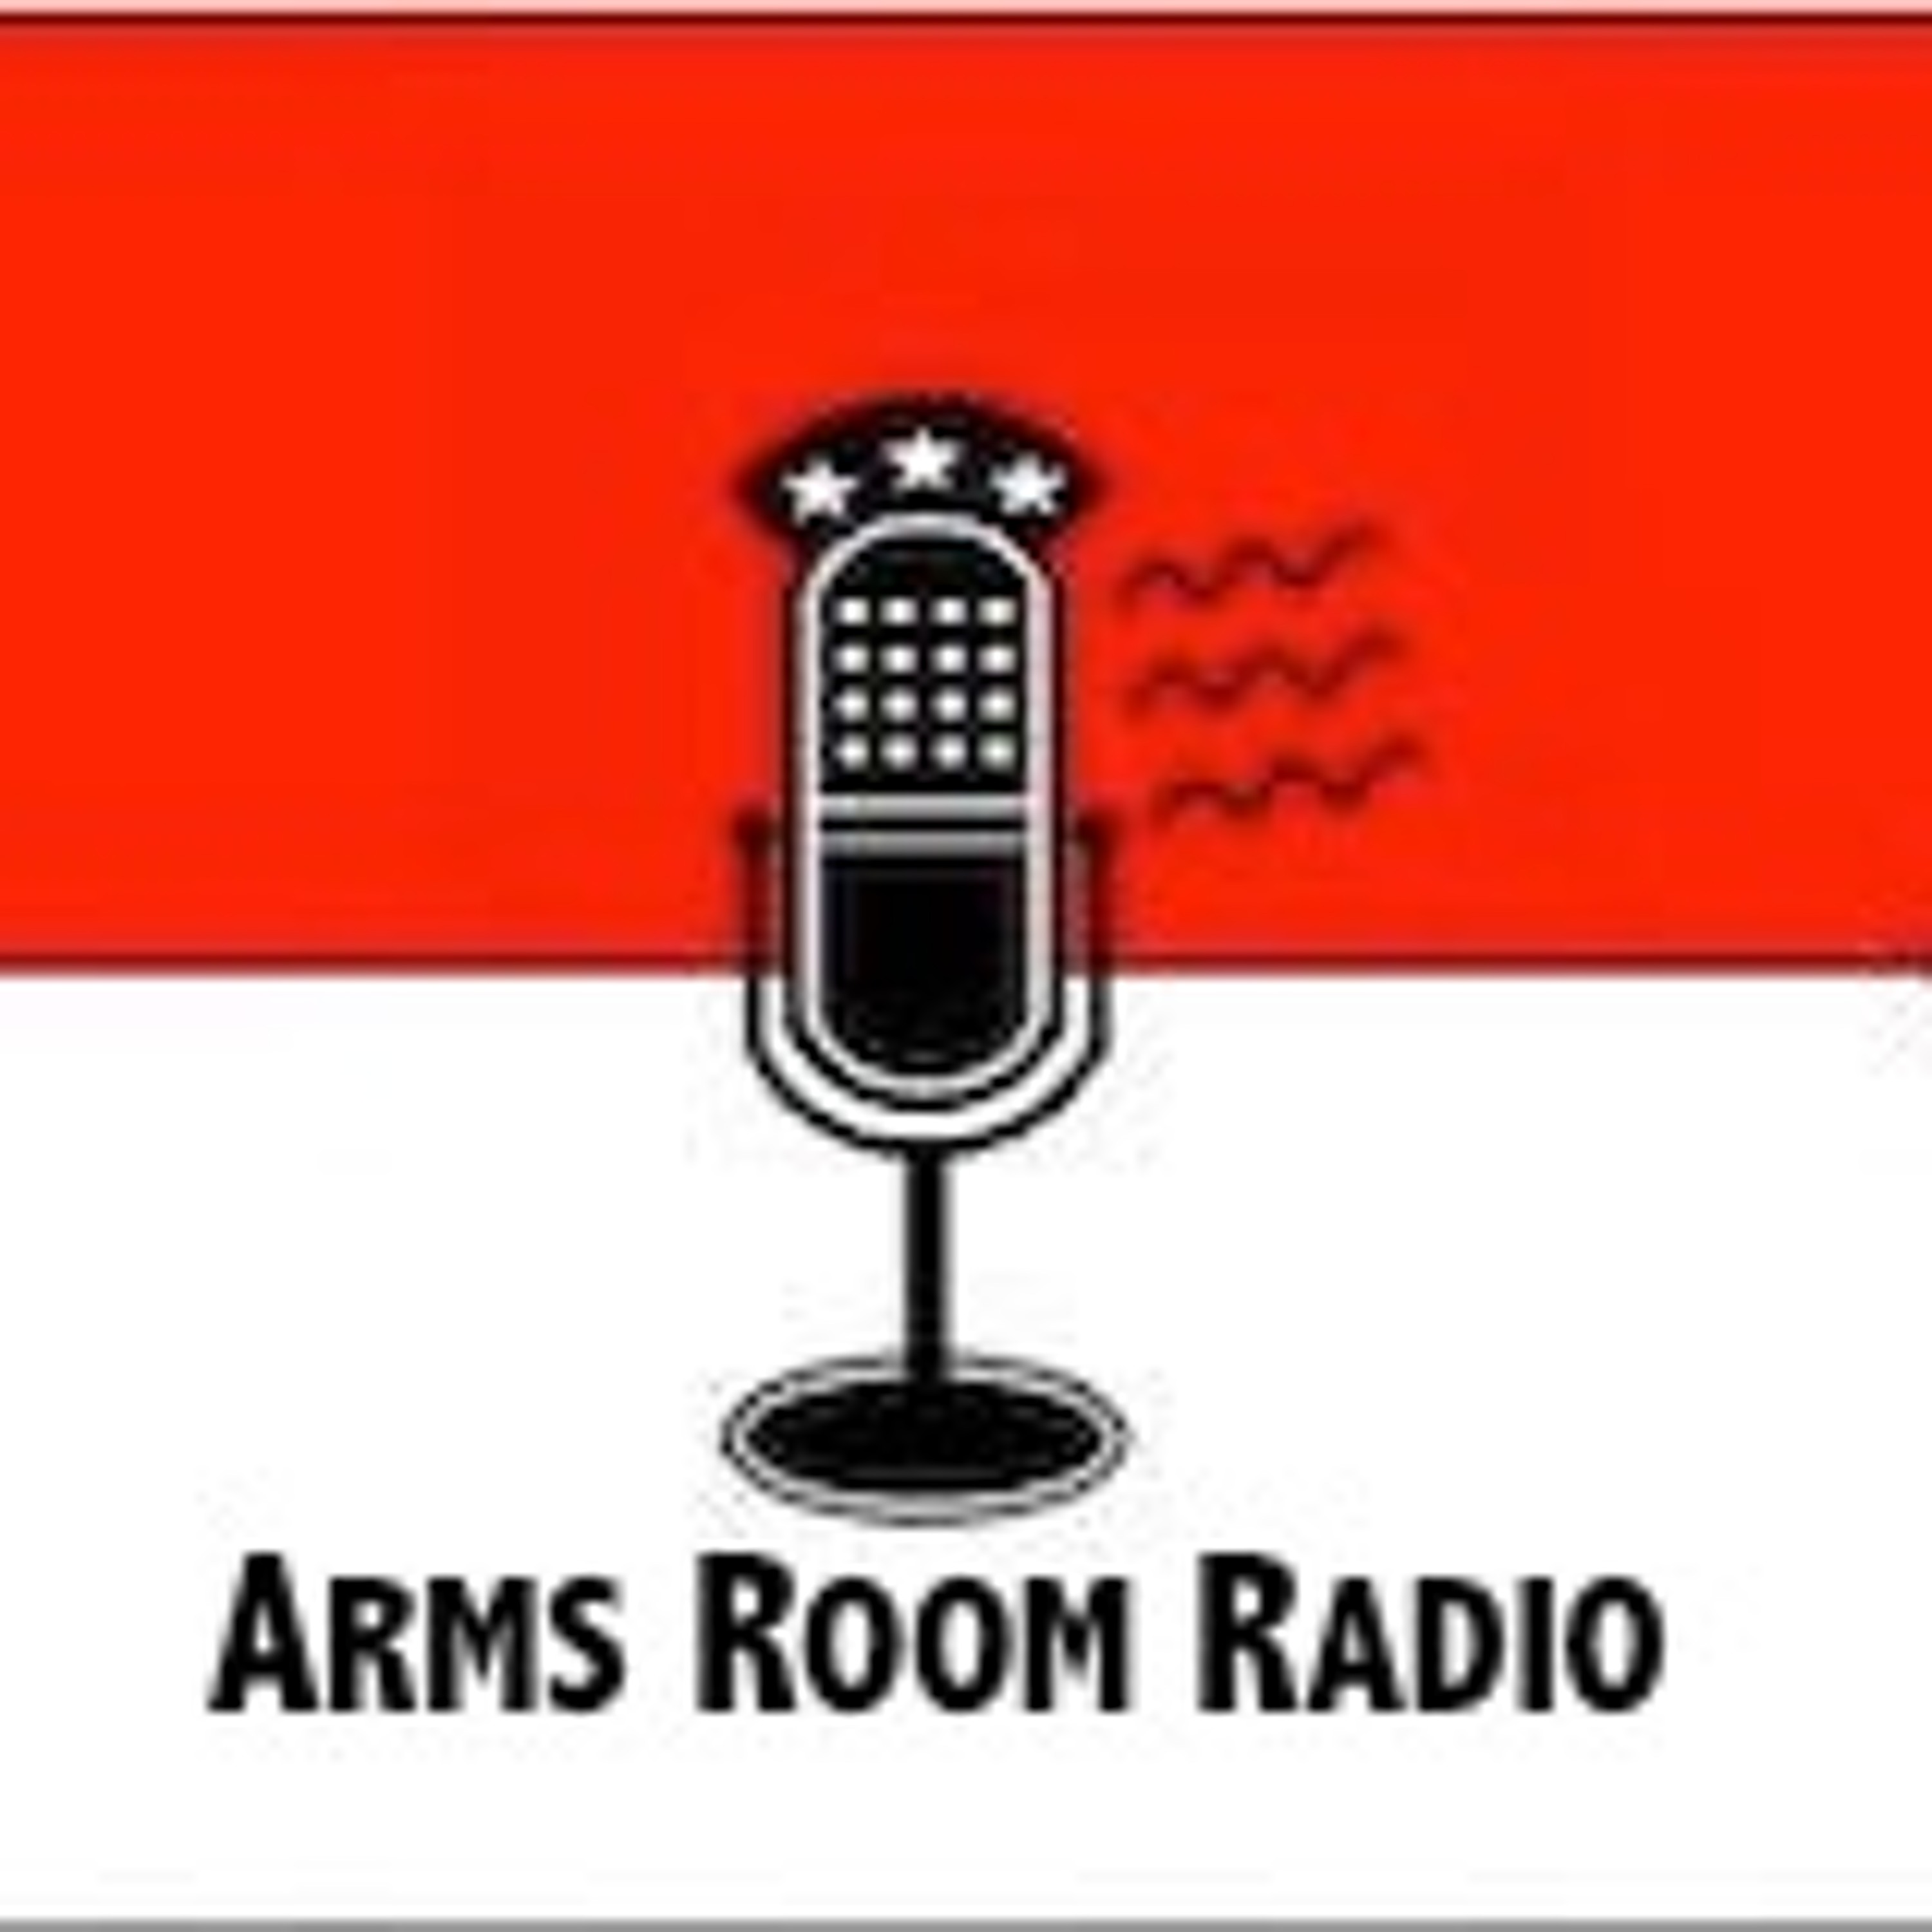 ArmsRoomRadio 02.23.19 Benchmade, Best Buy and Baltimore